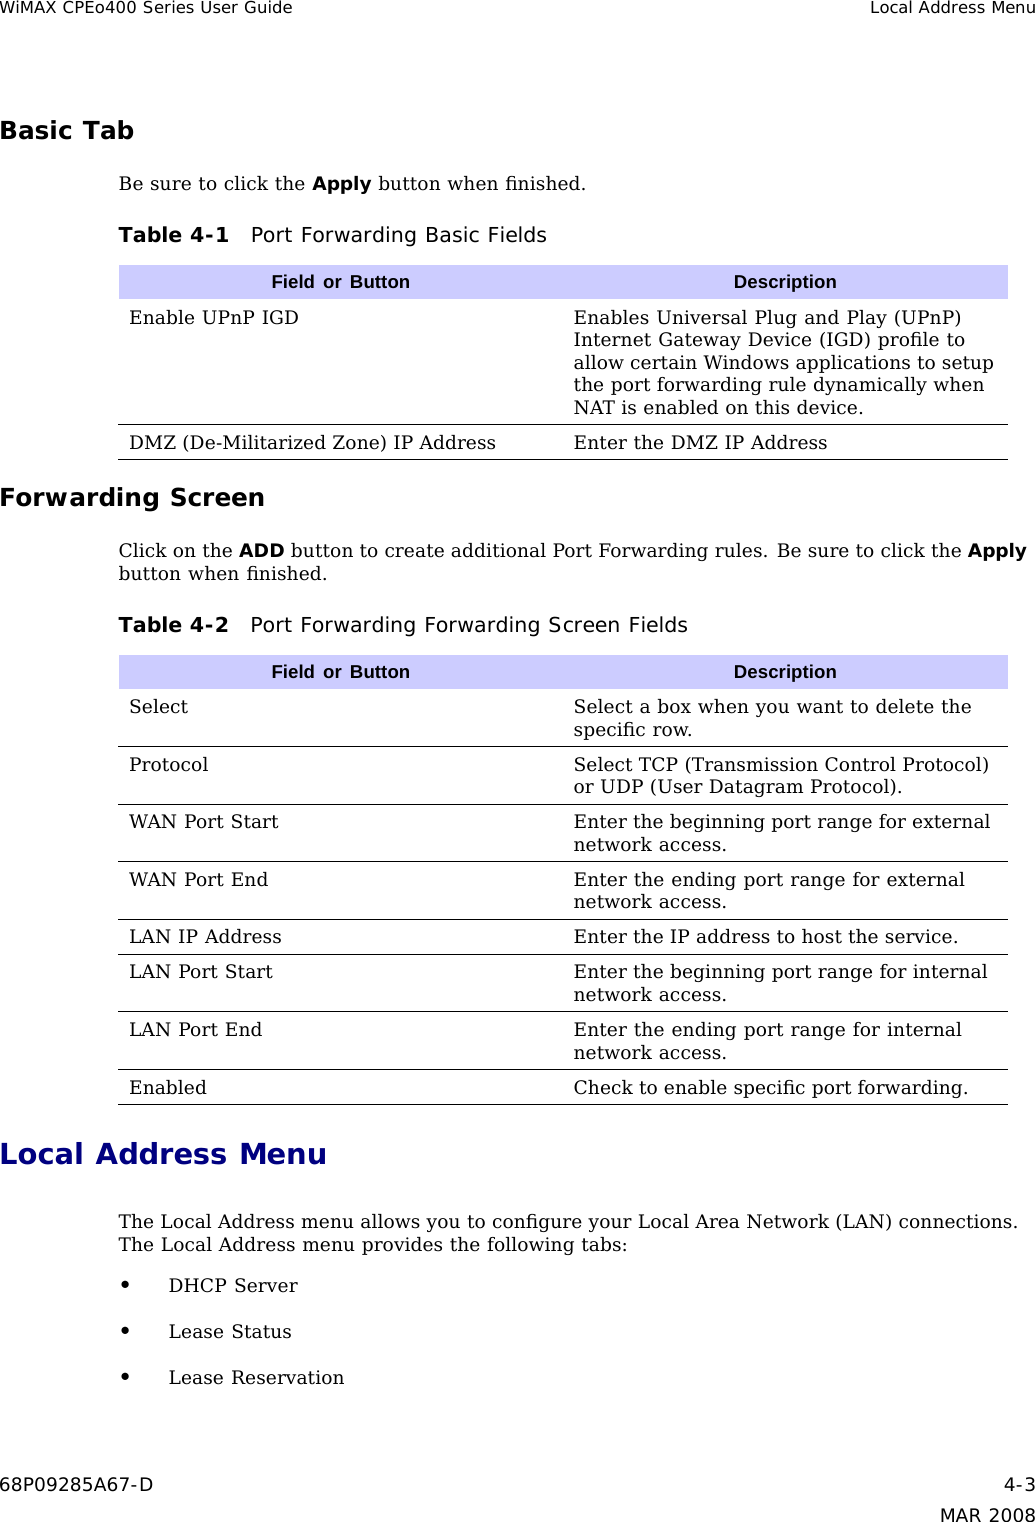 WiMAX CPEo400 Series User Guide Local Address MenuBasic TabBe sure to click the Apply button when ﬁnished.Table 4-1 Port Forwarding Basic FieldsField or Button DescriptionEnable UPnP IGD Enables Universal Plug and Play (UPnP)Internet Gateway Device (IGD) proﬁle toallow certain Windows applications to setupthe port forwarding rule dynamically whenNAT is enabled on this device.DMZ (De-Militarized Zone) IP Address Enter the DMZ IP AddressForwarding ScreenClick on the ADD button to create additional Port Forwarding rules. Be sure to click the Applybutton when ﬁnished.Table 4-2 Port Forwarding Forwarding Screen FieldsField or Button DescriptionSelect Select a box when you want to delete thespeciﬁcrow.Protocol Select TCP (Transmission Control Protocol)or UDP (User Datagram Protocol).WAN Port Start Enter the beginning port range for externalnetwork access.WAN Port End Enter the ending port range for externalnetwork access.LAN IP Address Enter the IP address to host the service.LAN Port Start Enter the beginning port range for internalnetwork access.LAN Port End Enter the ending port range for internalnetwork access.Enabled Check to enable speciﬁcportforwarding.Local Address MenuThe Local Address menu allows you to conﬁgure your Local Area Network (LAN) connections.The Local Address menu provides the following tabs:•DHCP Server•Lease Status•Lease Reservation68P09285A67-D 4-3MAR 2008